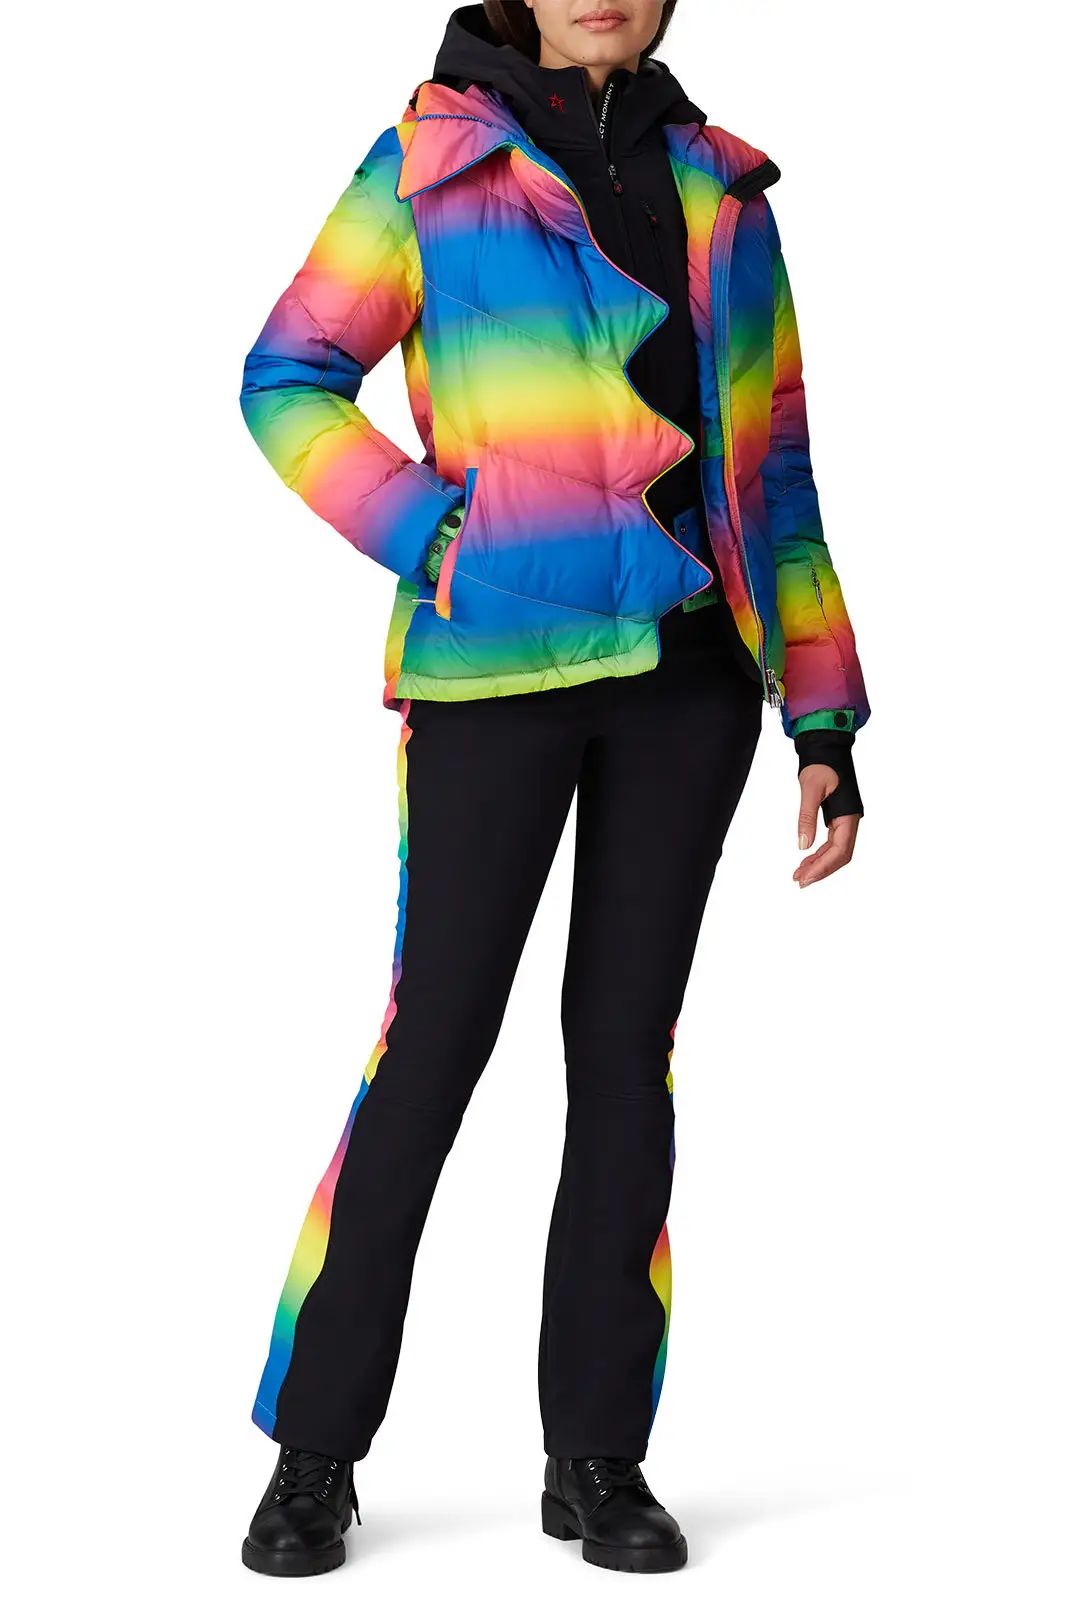 Perfect Moment Rainbow Chevron Super Day Jacket | Rent The Runway